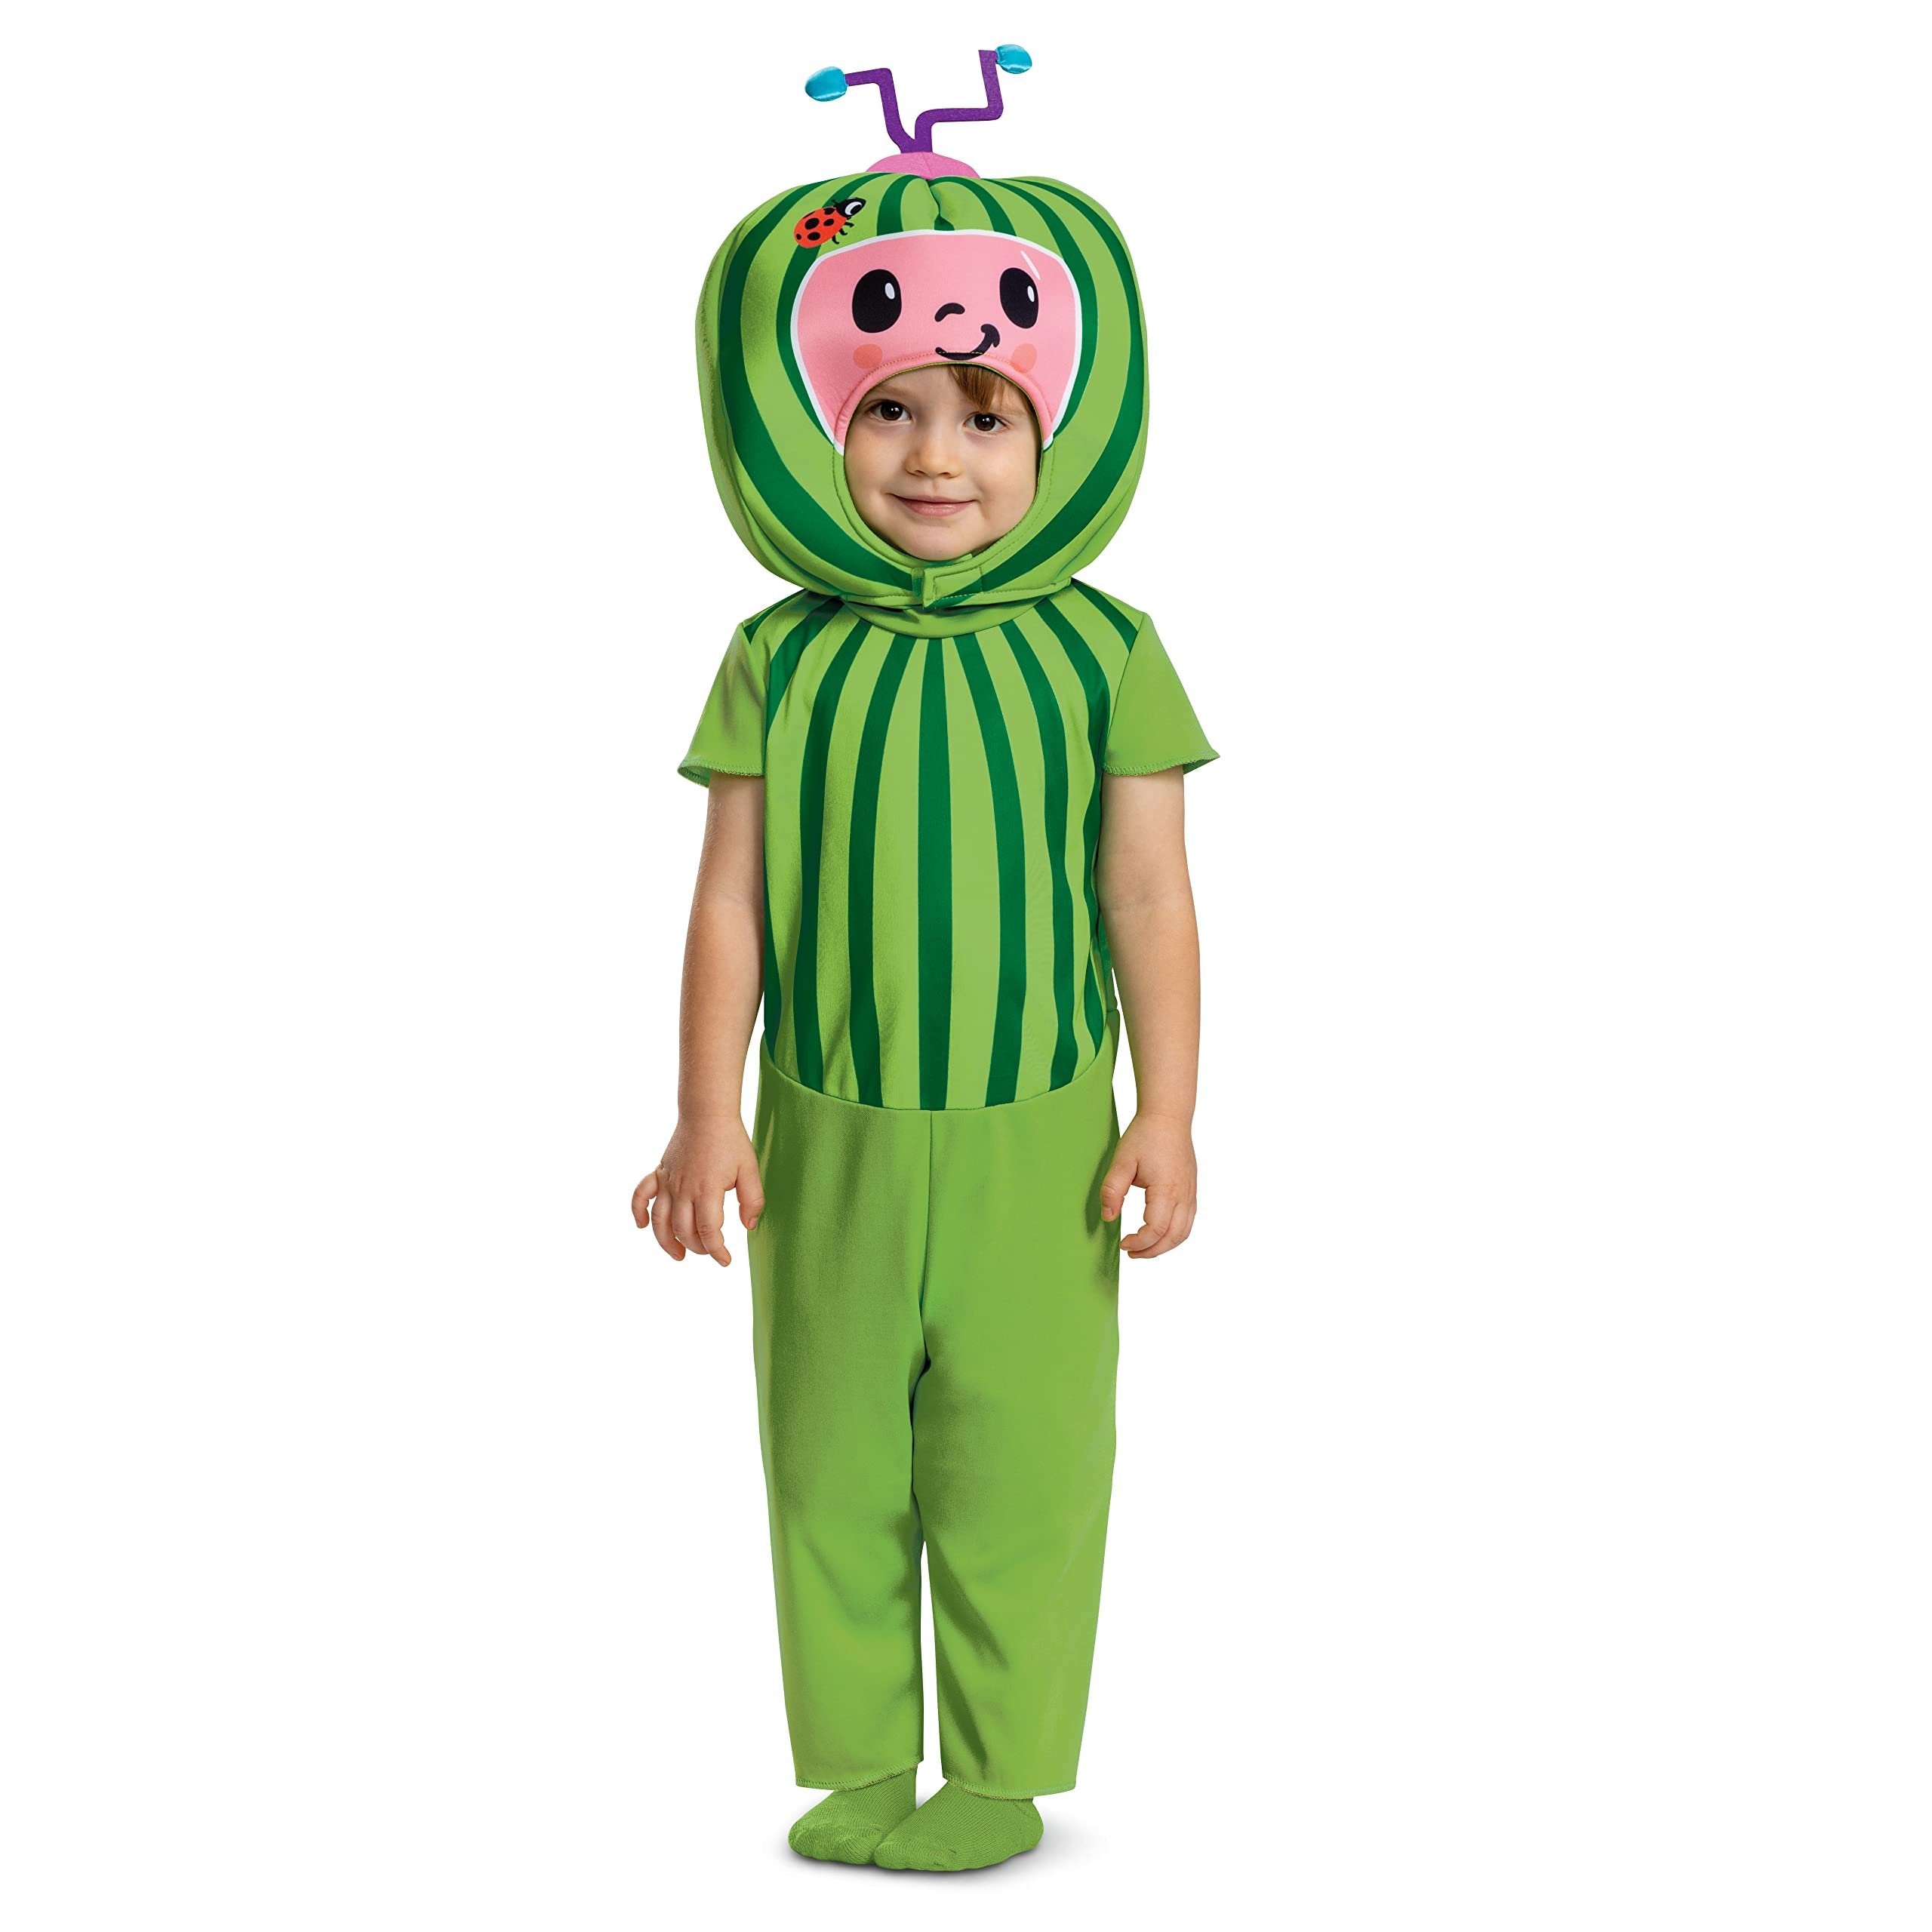 Disguise Cocomelon Costume for Kids, Official Cocomelon Costume Watermelon Headpiece, Toddler Size Small (2T)